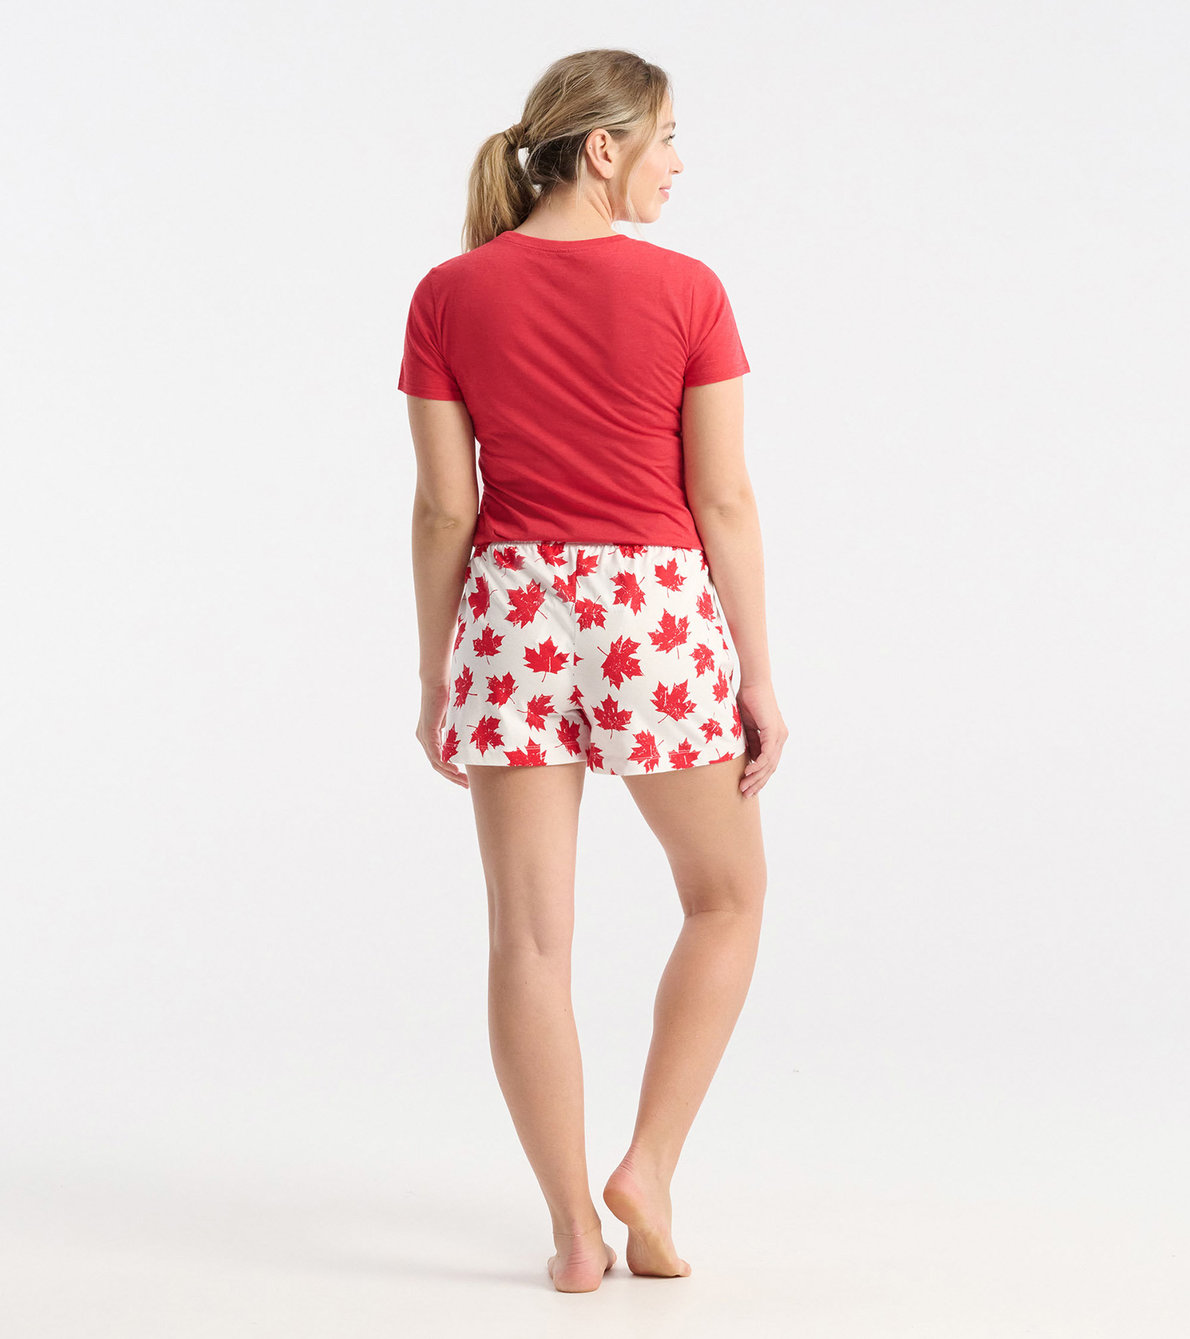 View larger image of Canada Womens Sleep Shorts